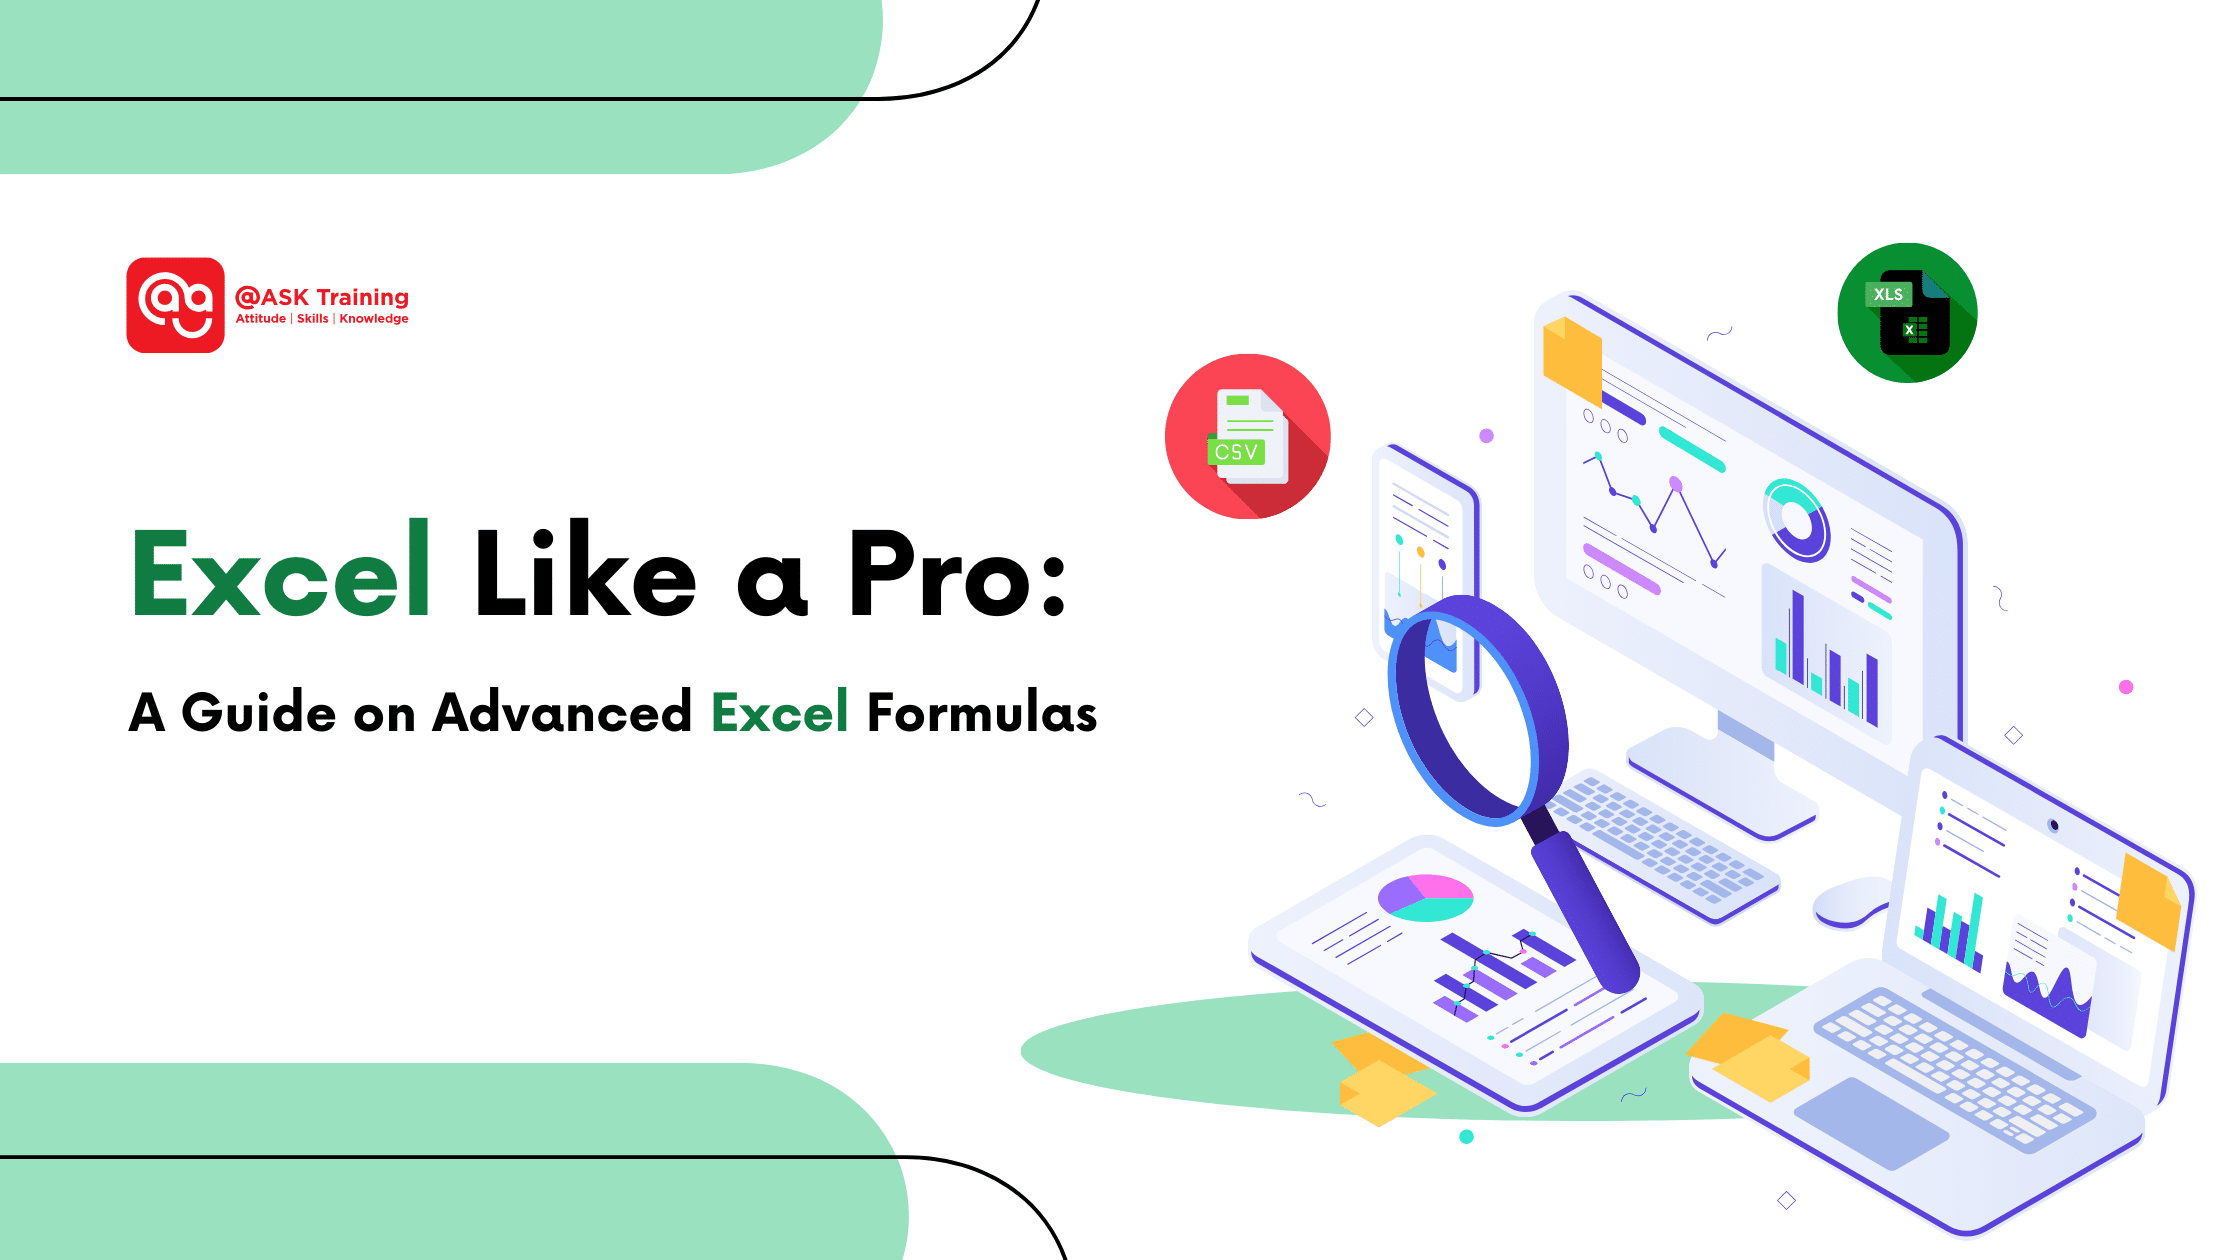 header image for Excel with computer elements and Excel icons